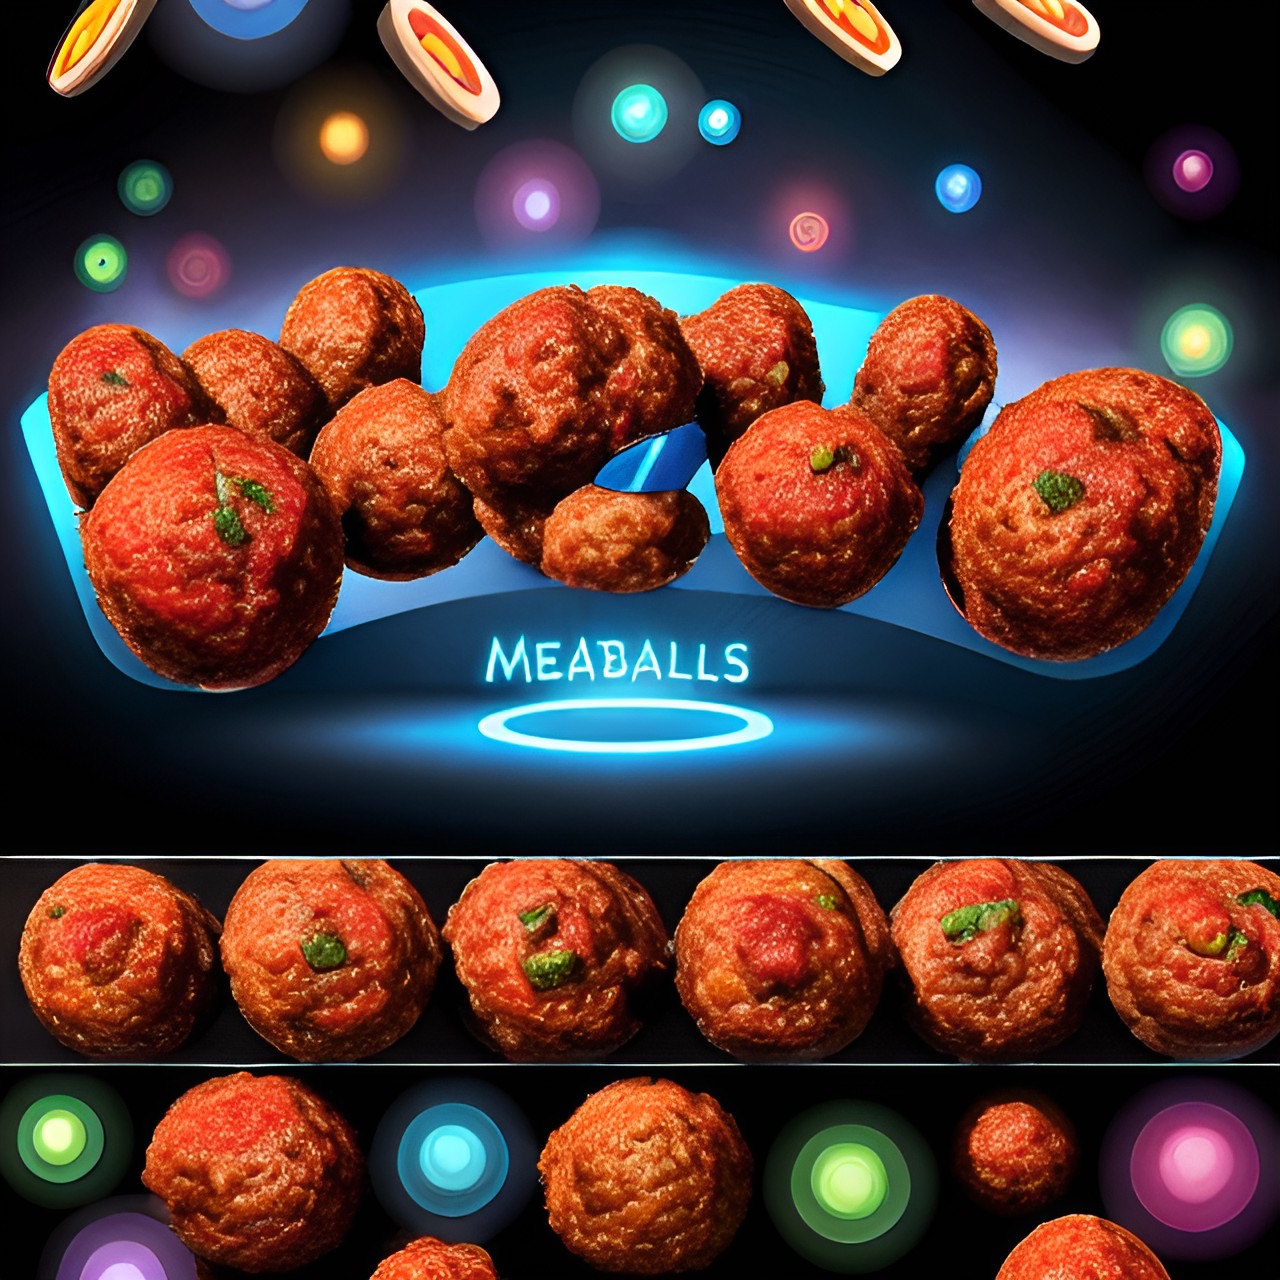 Meatballs delights: template for meatballs photo pinterest preview image.